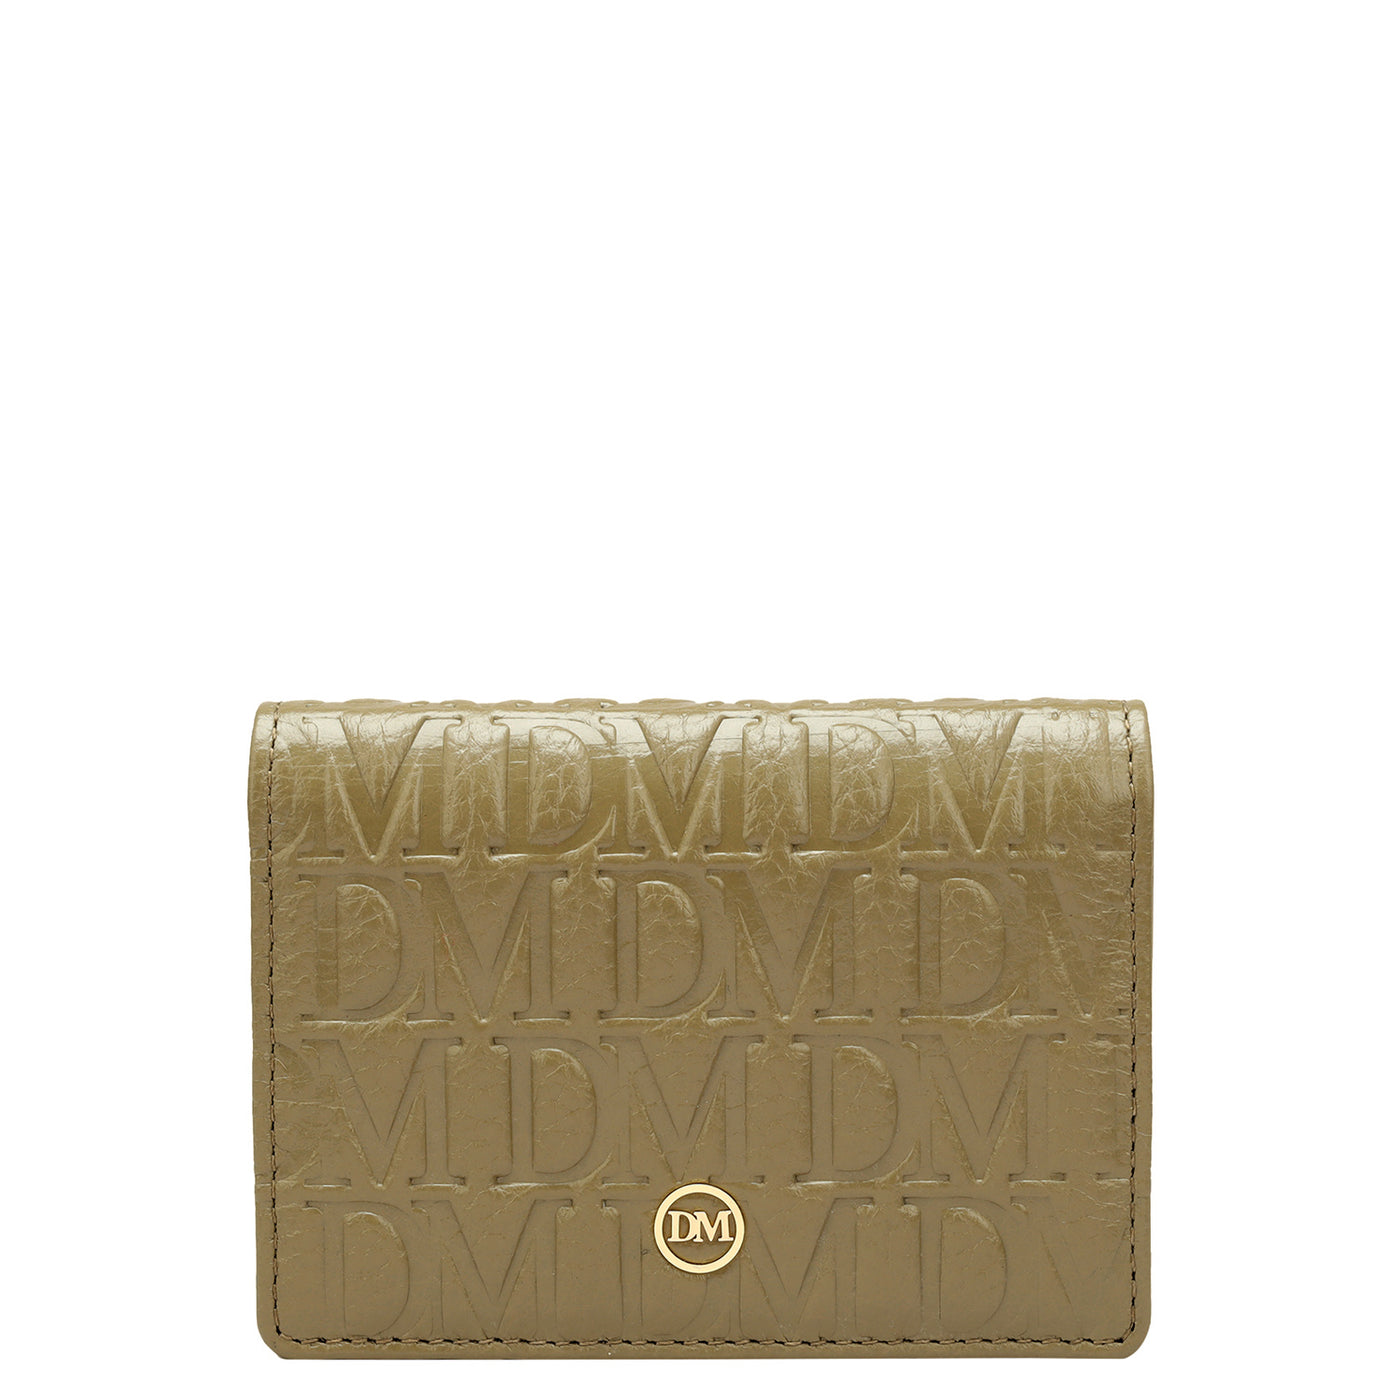 Monogram Wax Leather Card Case - Olive